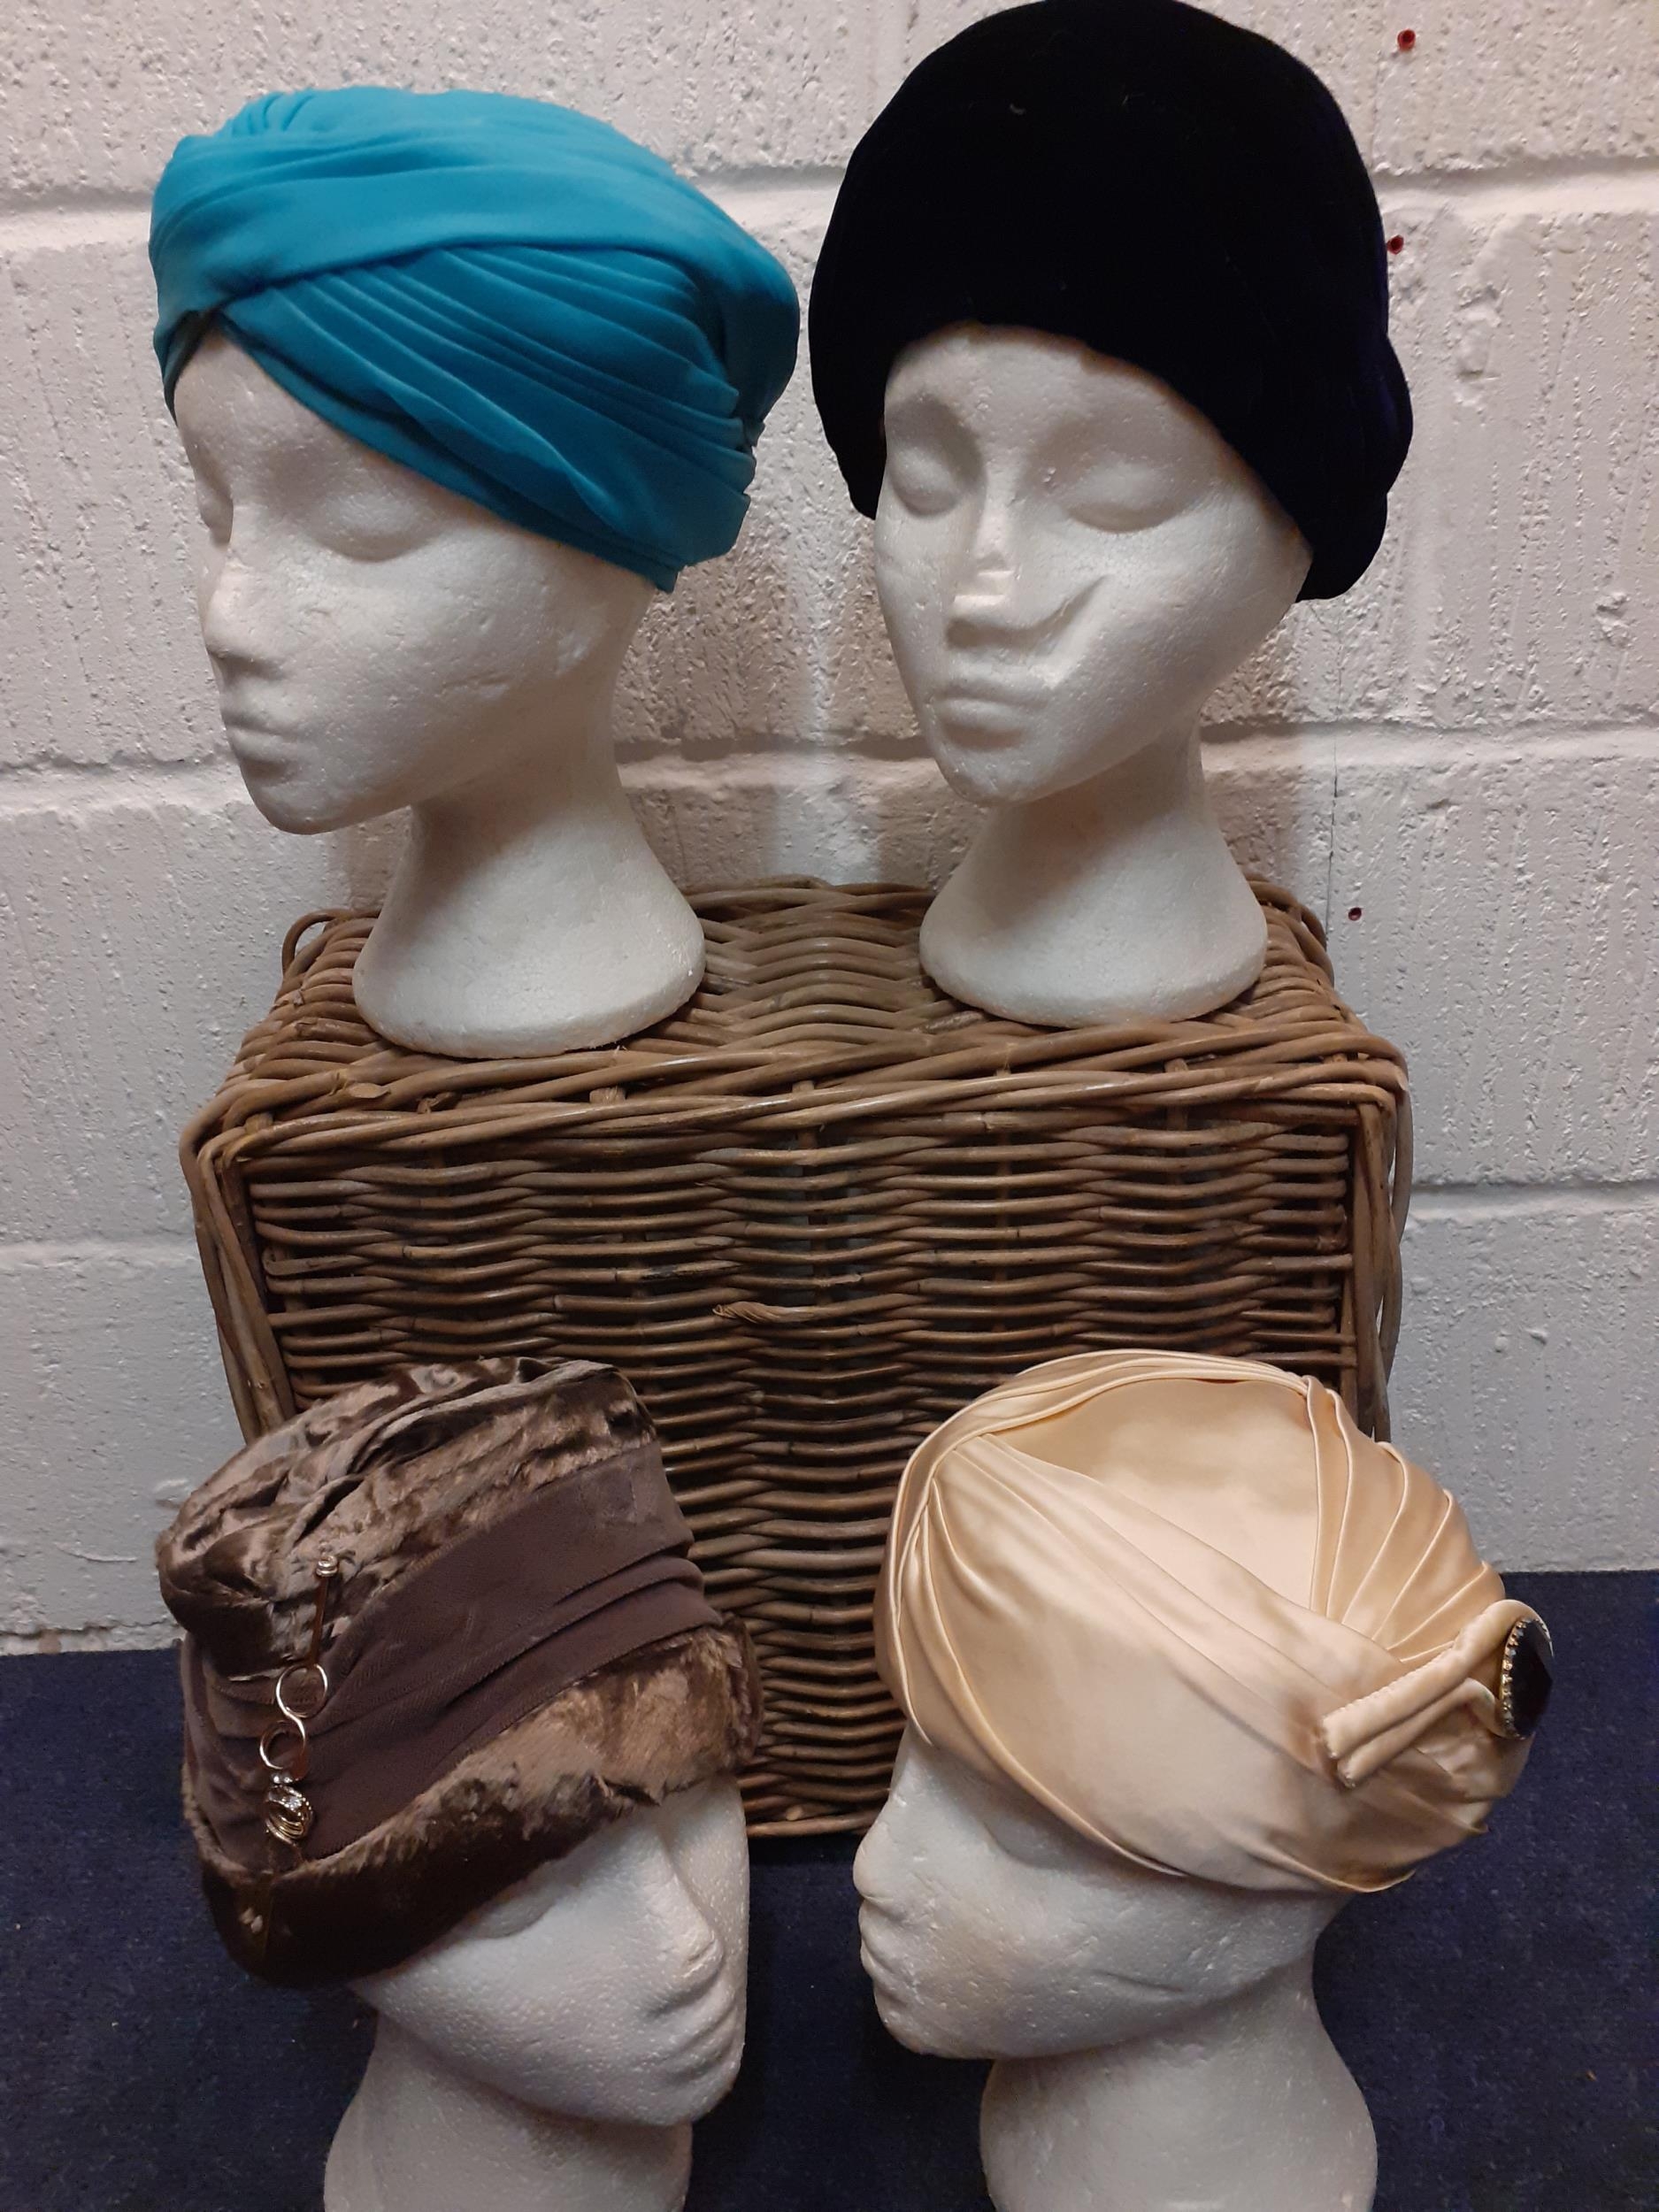 A quantity of 12 vintage hats to include 1940's turbans and formal hats by Jacoll, all housed in a - Image 2 of 4